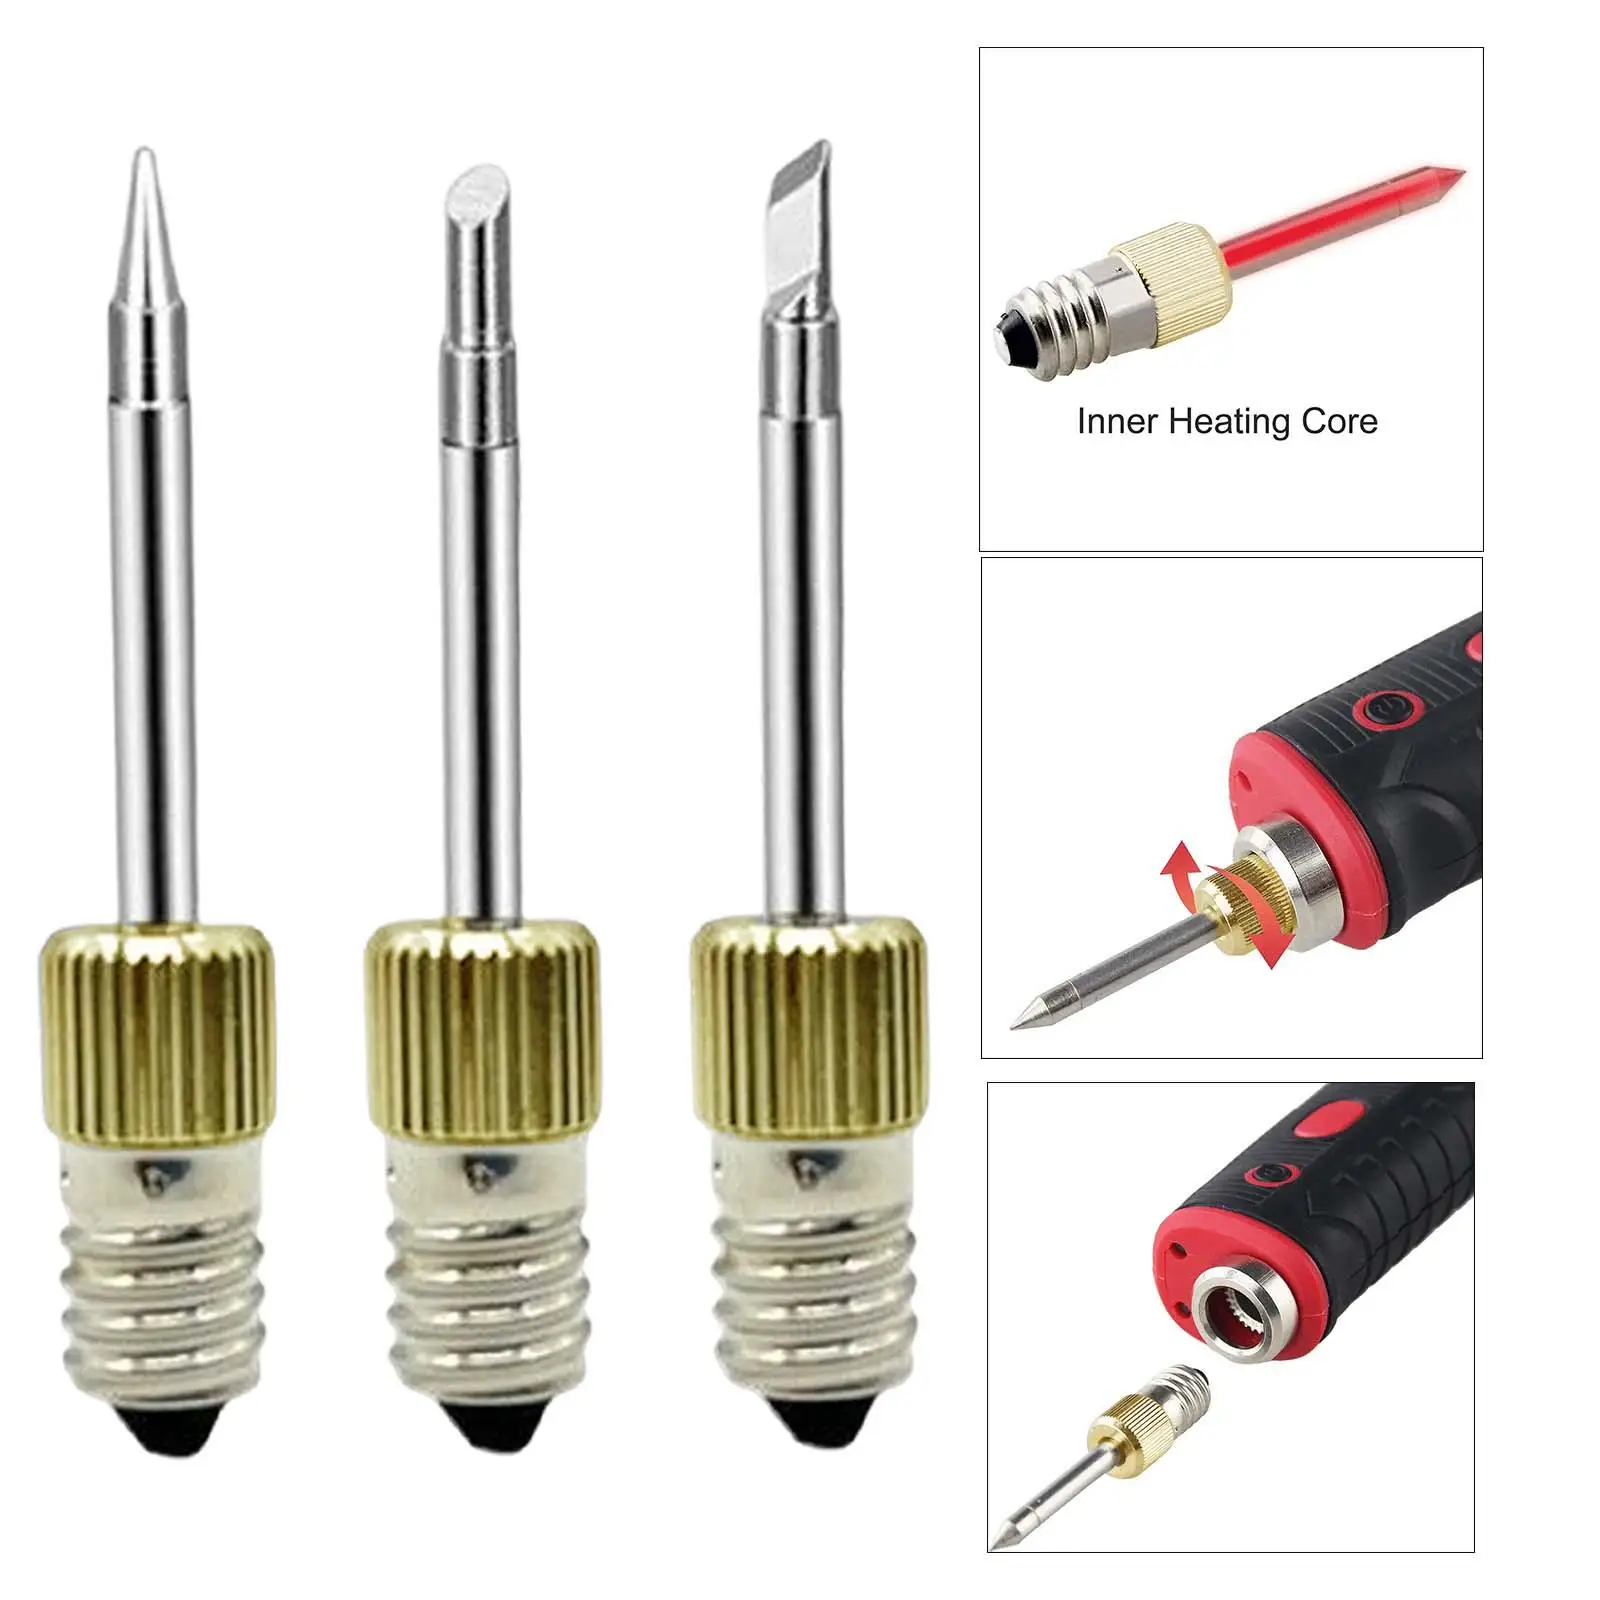 3 Pieces Electric Soldering Iron Tips Replacement E10 Interface Components Needle Tips Tool Steel solder for Repair Welding